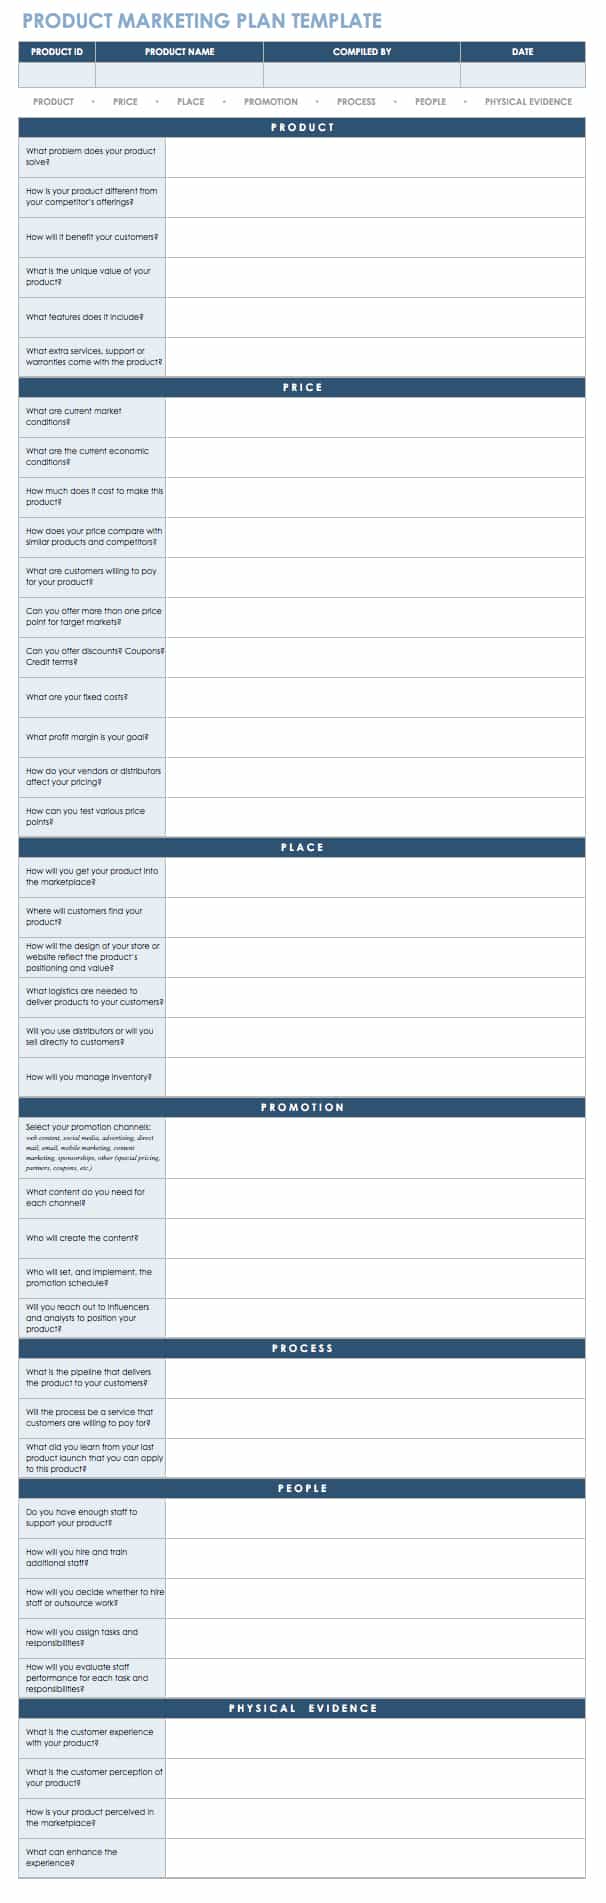 Comprehensive Guide to Product Marketing Smartsheet